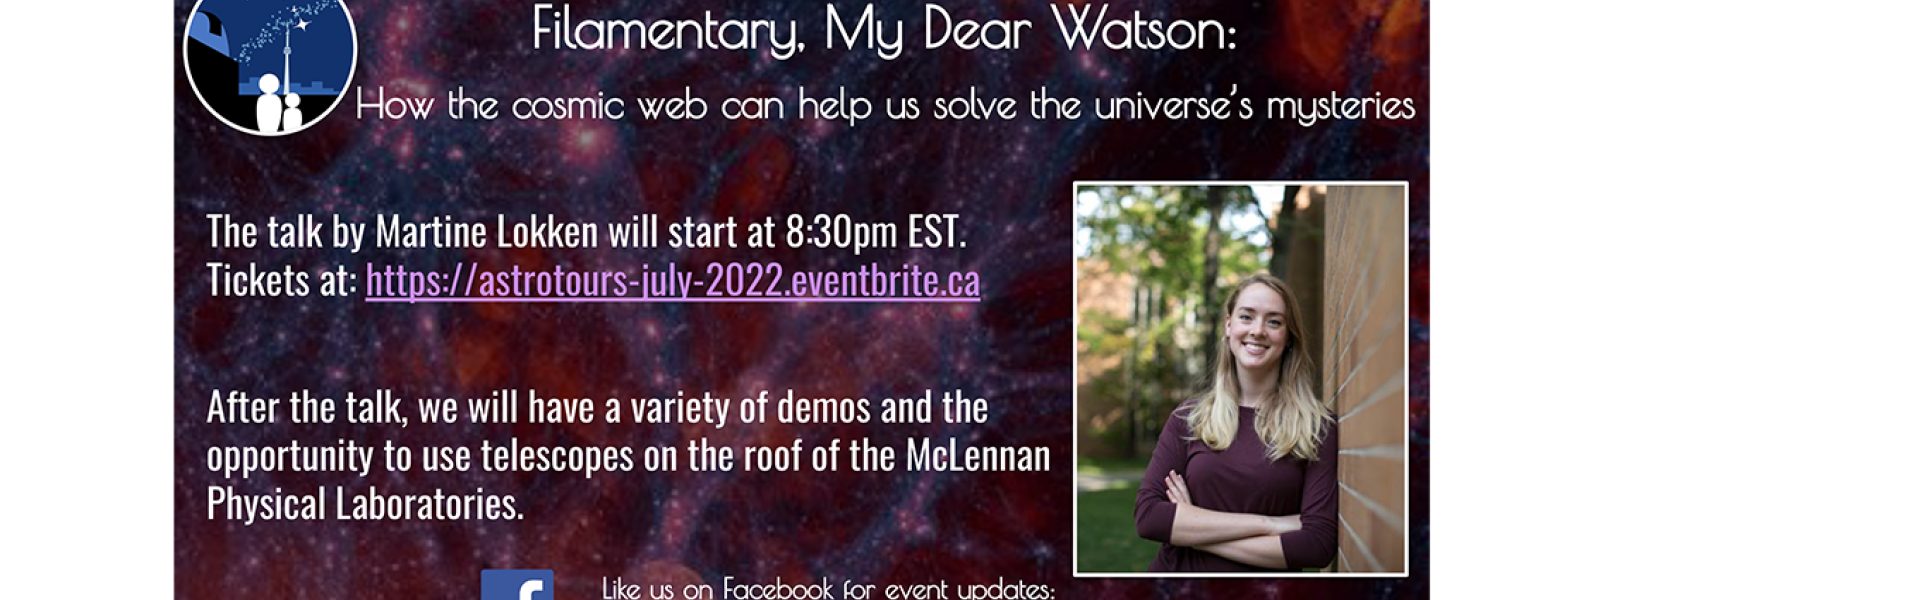 Filamentary, My Dear Watson: How the cosmic web can help us solve the universe’s mysteries